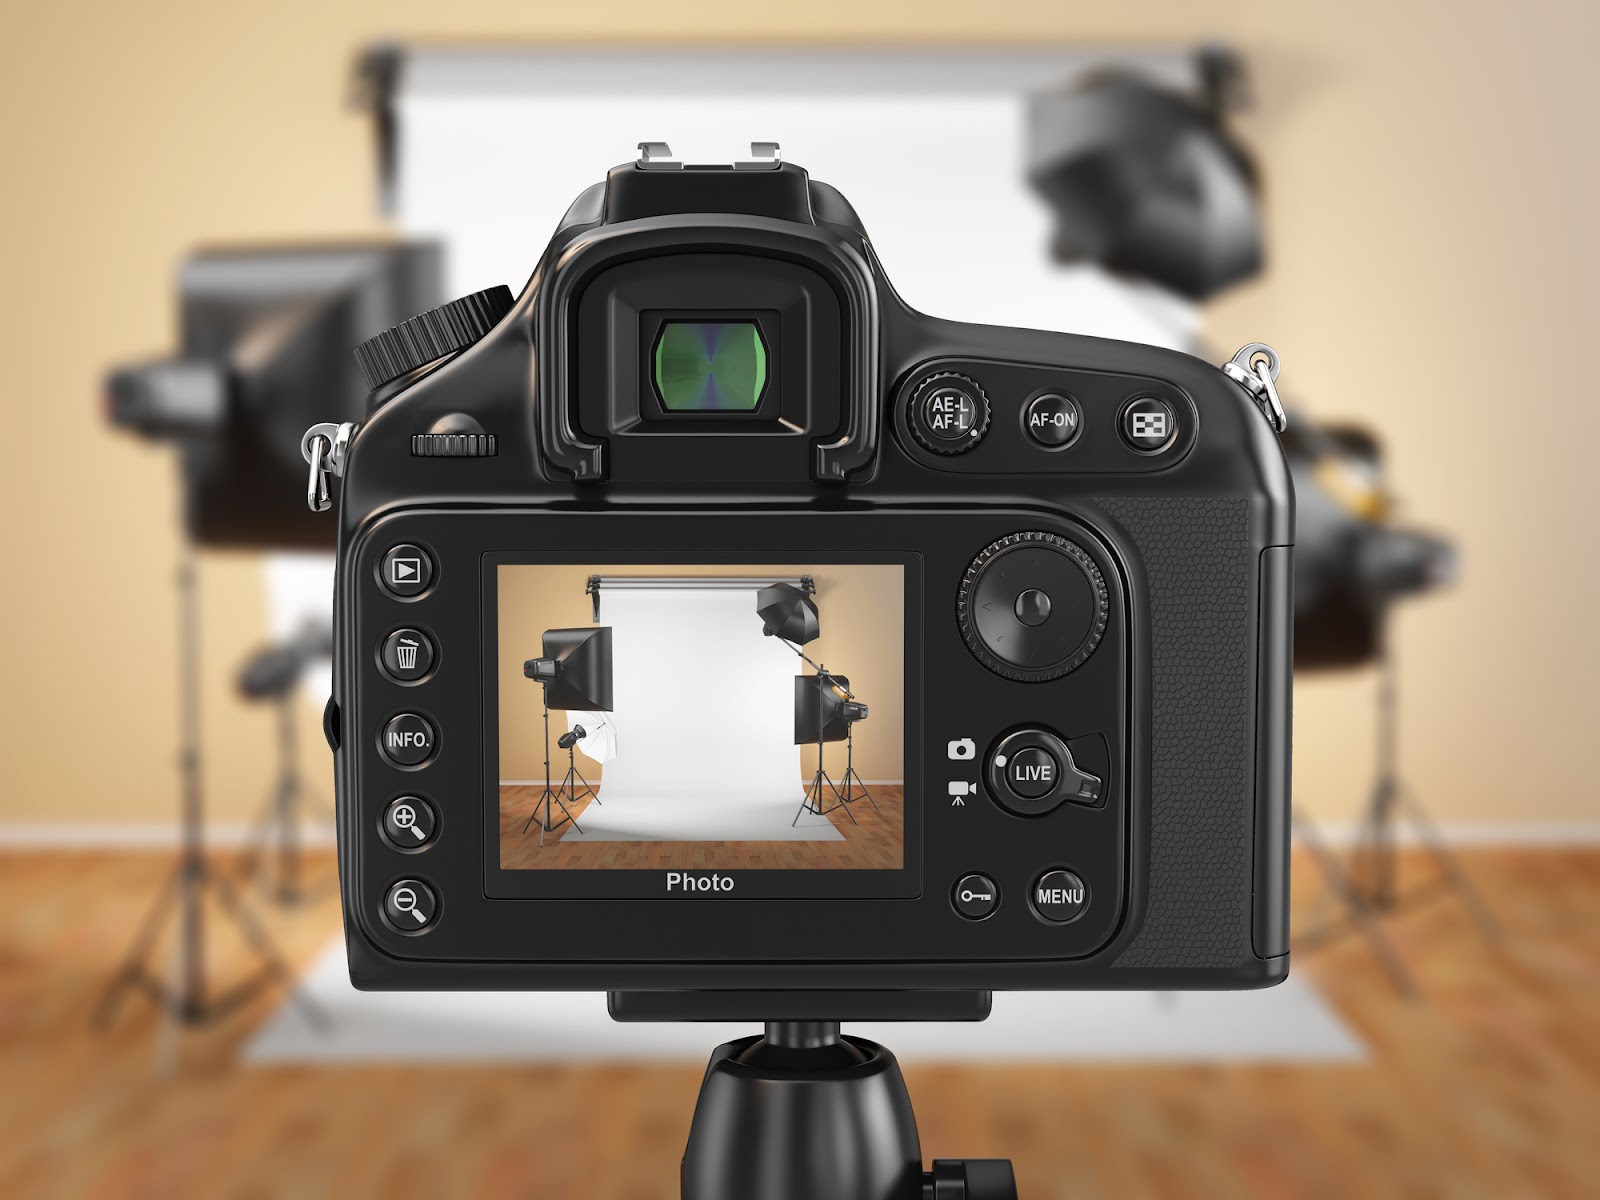 Close-up of the preview screen on a digital camera pointed at lights around a white backdrop inside a home.